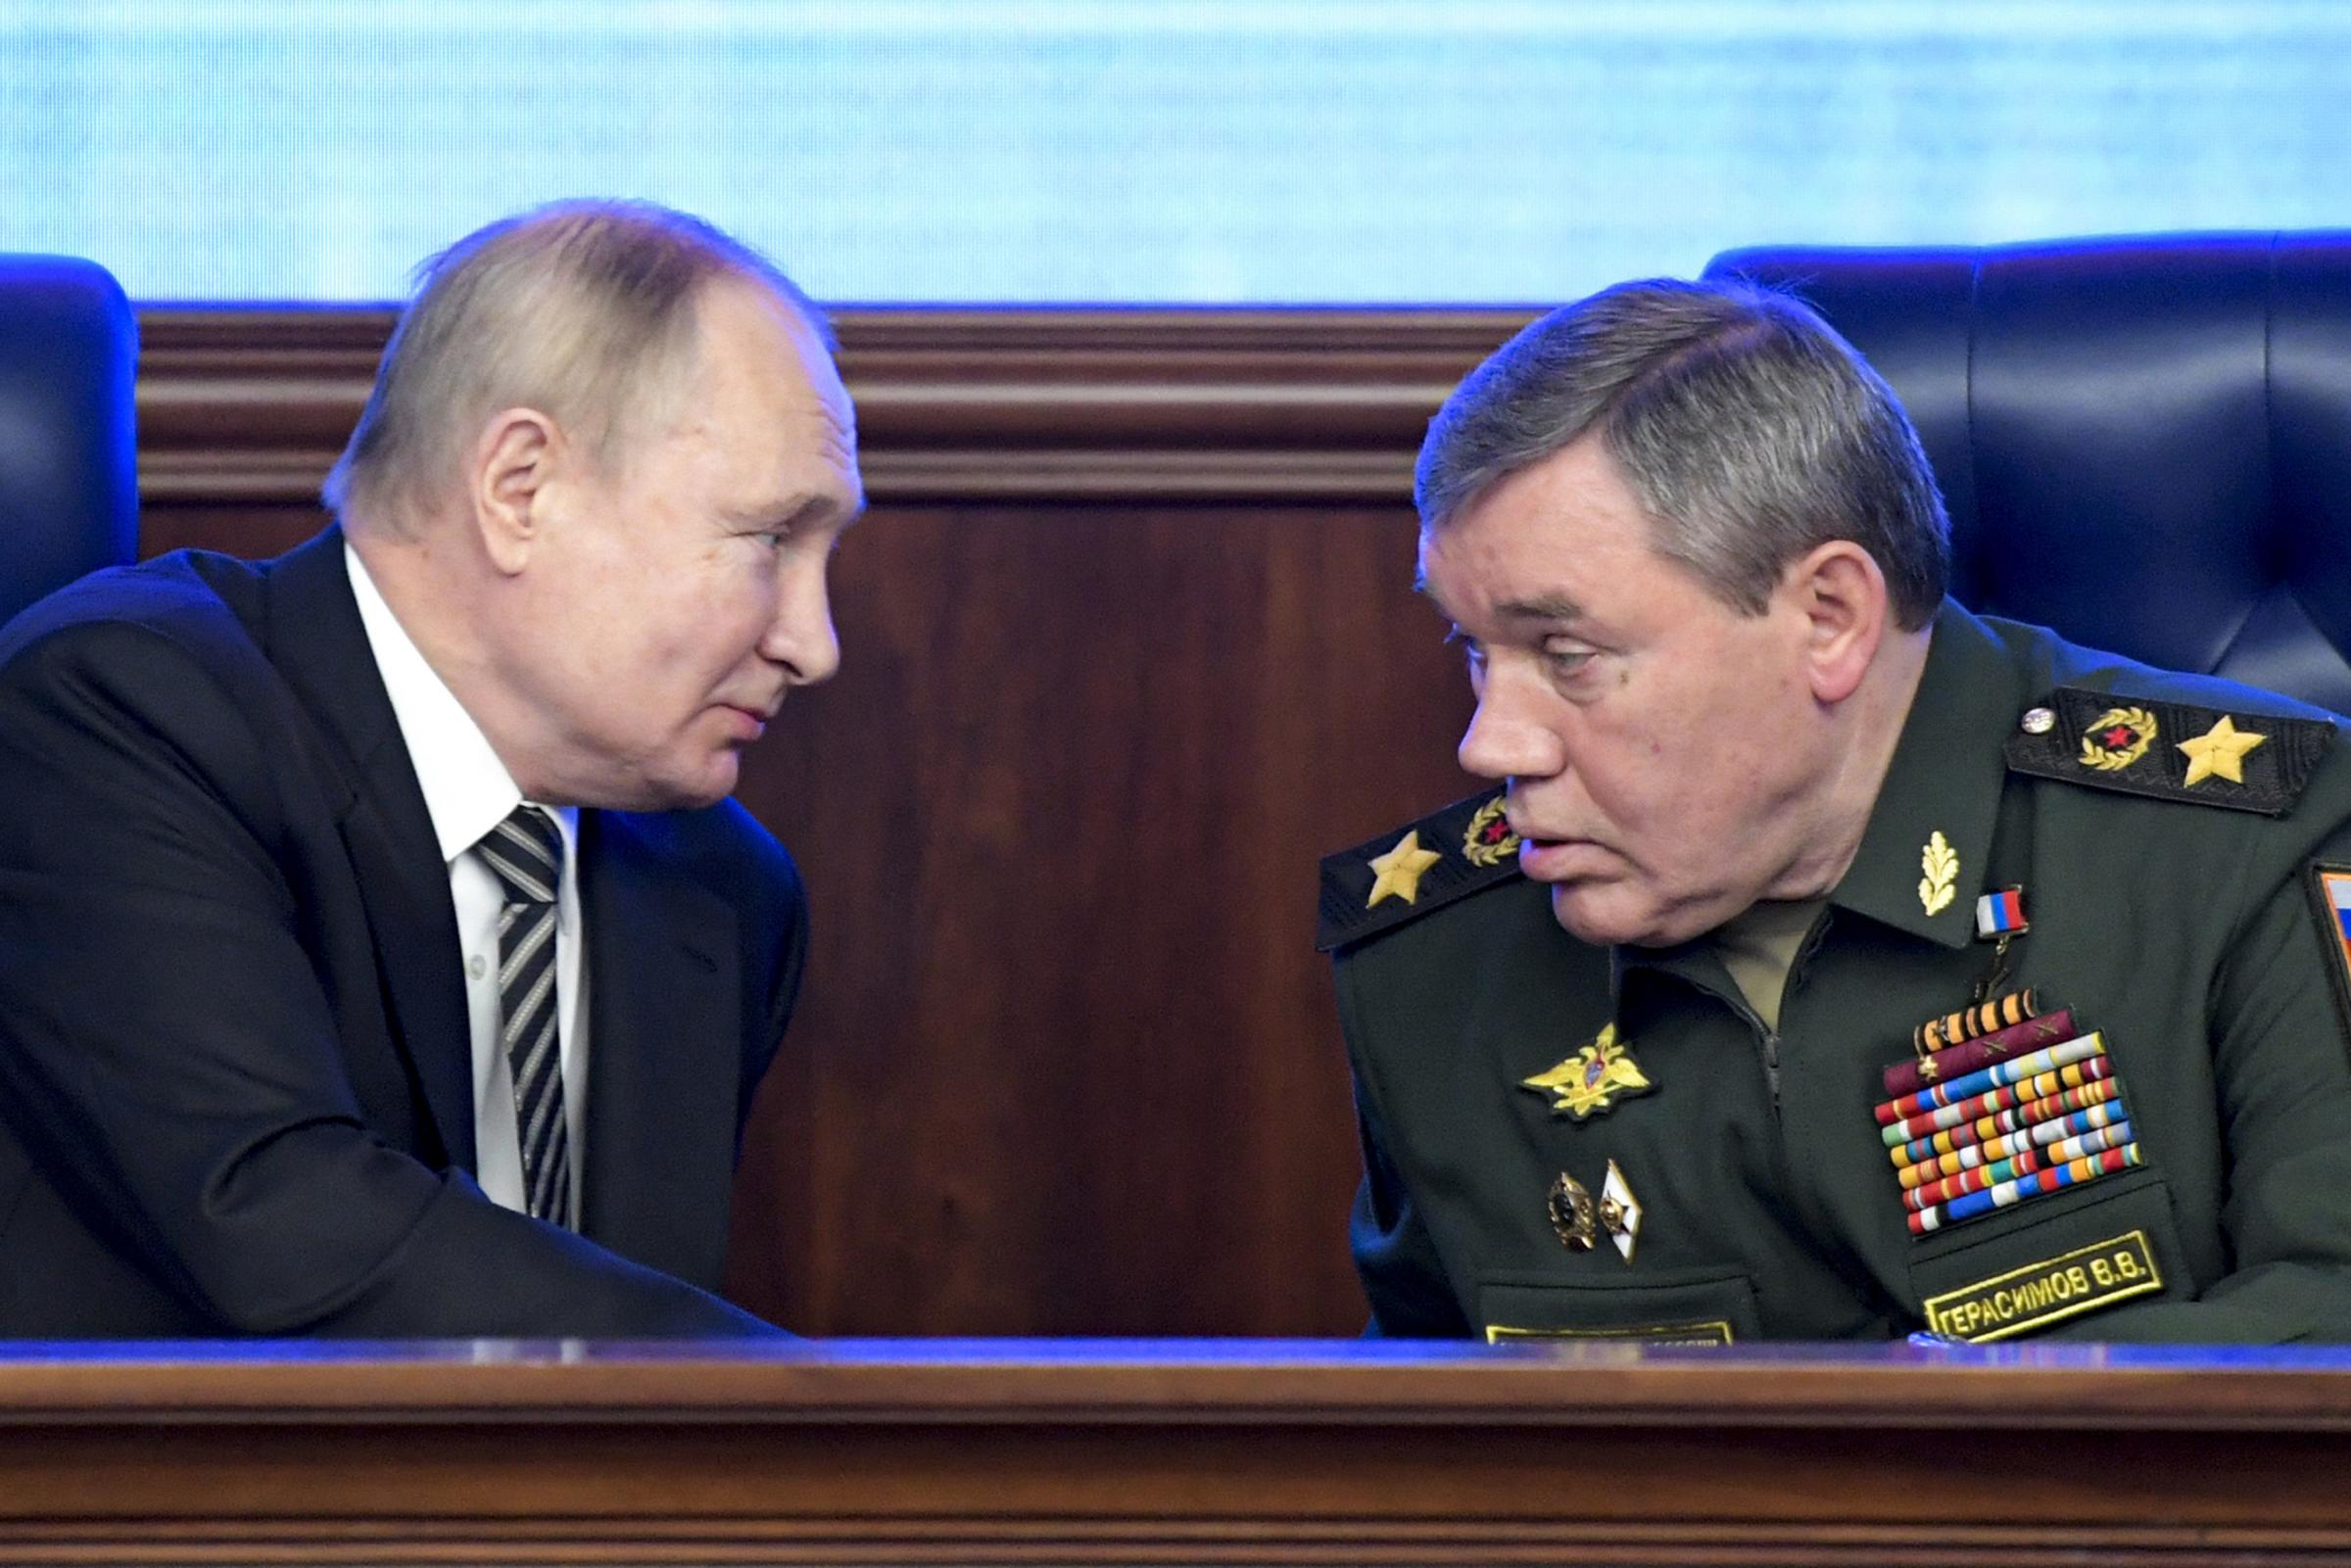 Russian President Vladimir Put, left, and Russian General Staff Valery Gerasimov talk to each other during an extended meeting of the Russian Defense Ministry Board at the National Defense Control Center with a Russian military map showing the alleged